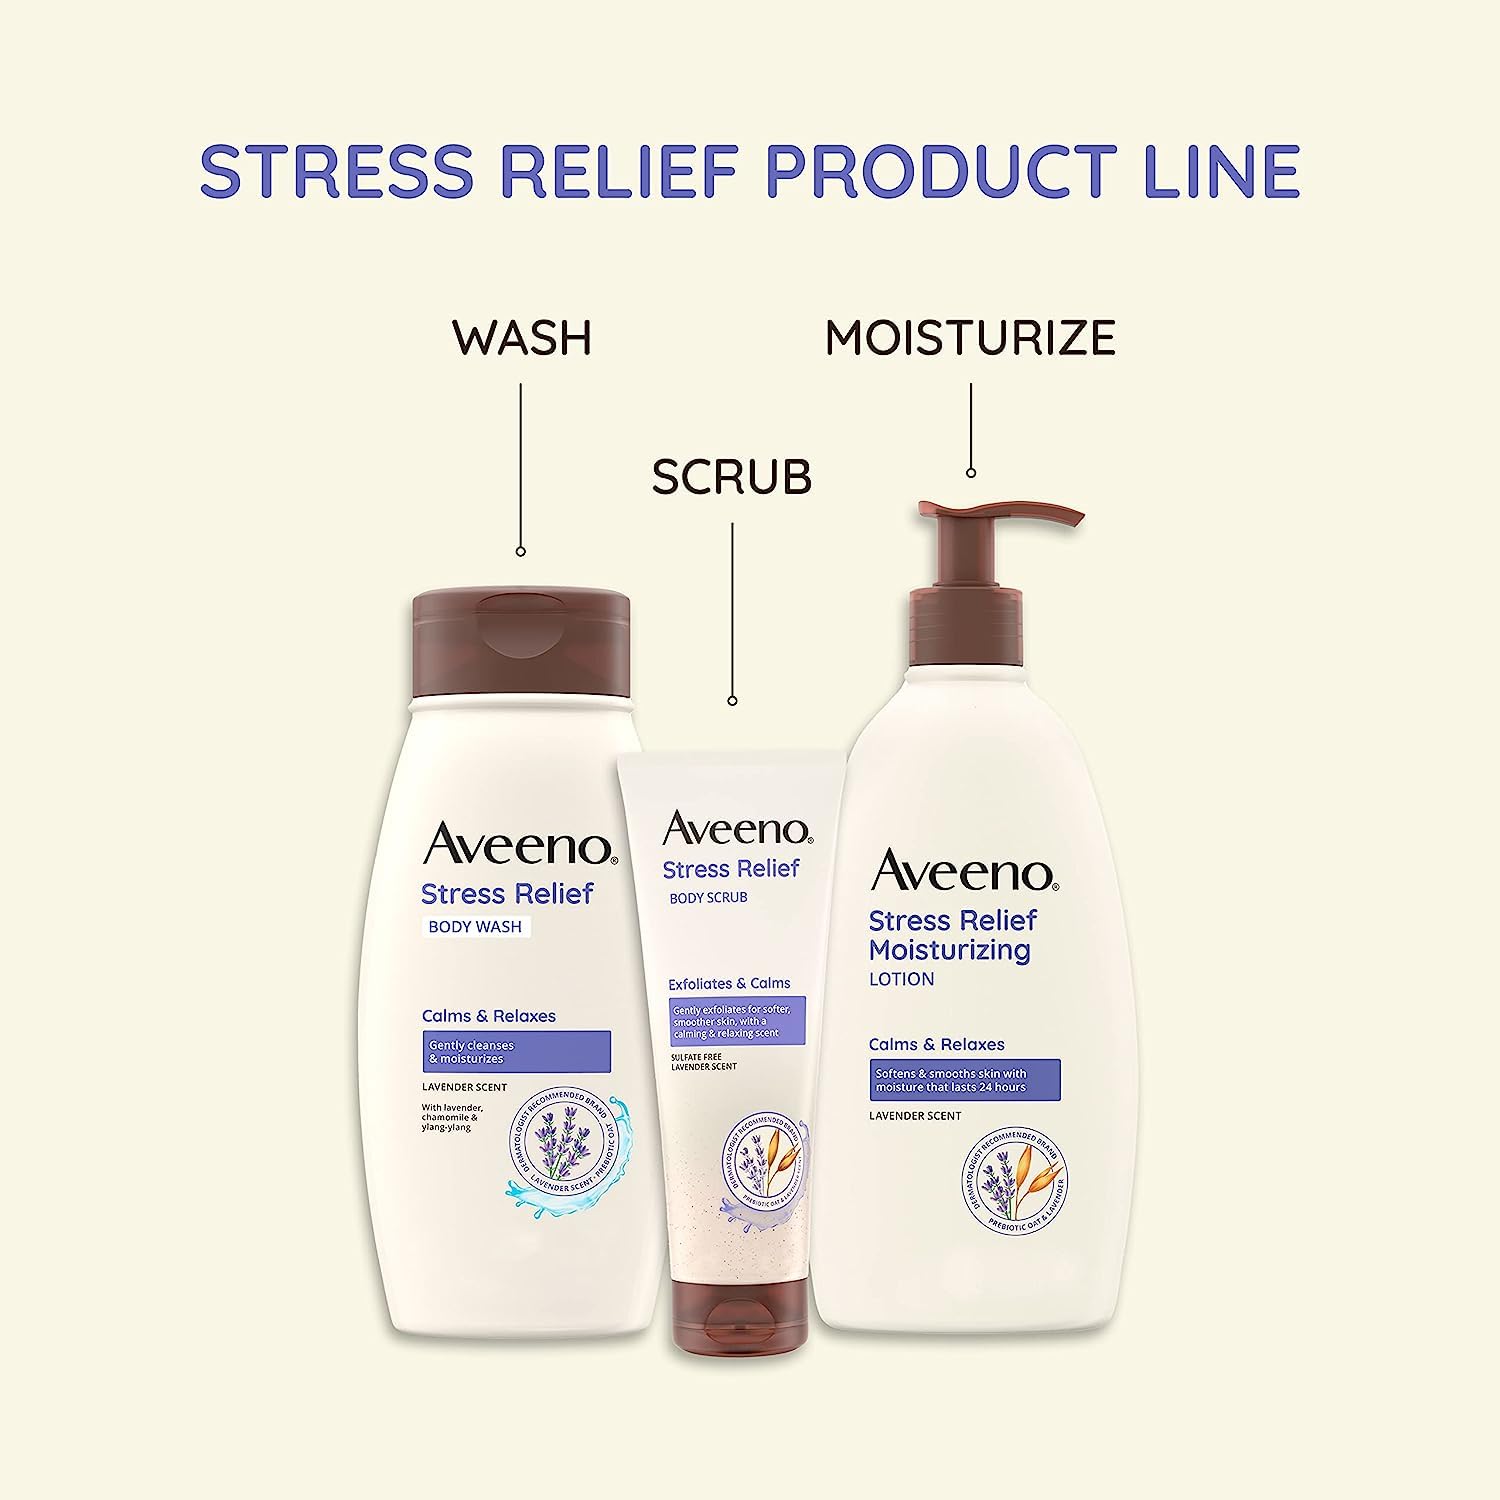 Aveeno Stress Relief Body Wash with Soothing Oat & Lavender Scent for Sensitive Skin, Moisturizing Shower Wash Gently Cleanses & Helps You Feel Calm & Relaxed, Sulfate-Free, 18 fl. oz